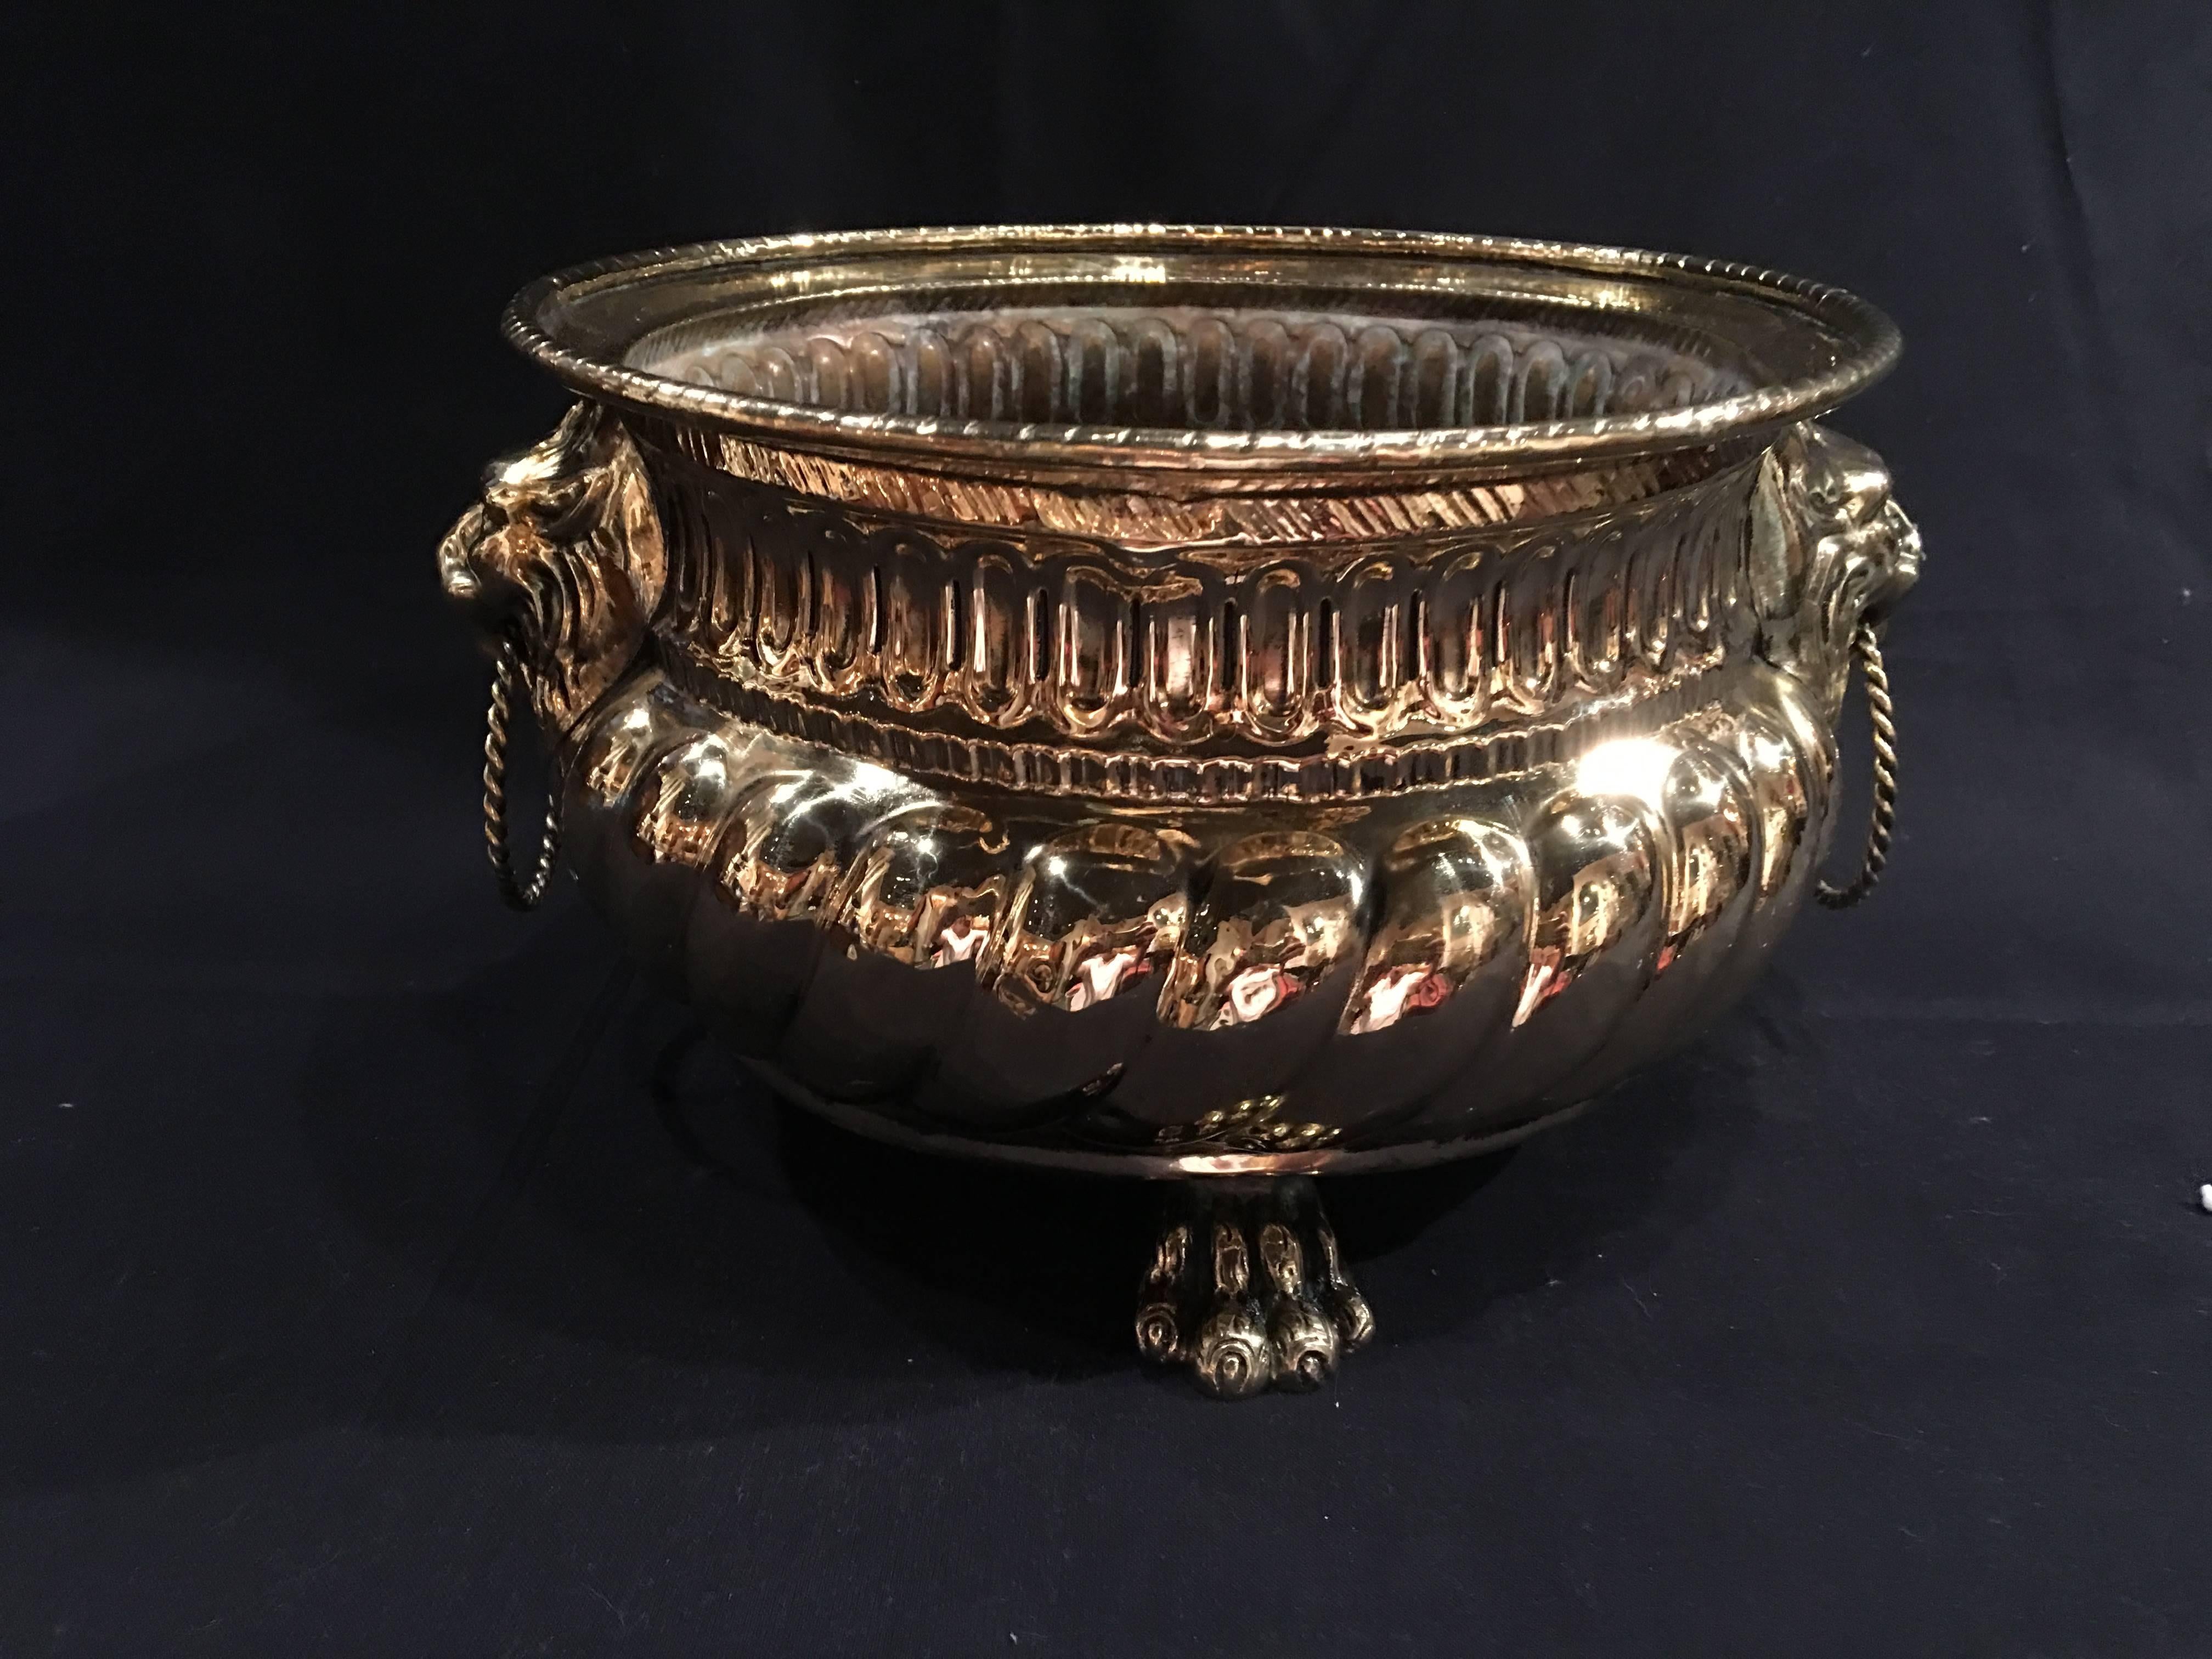 French polished brass jardinière or container with lion handles, 19th century.